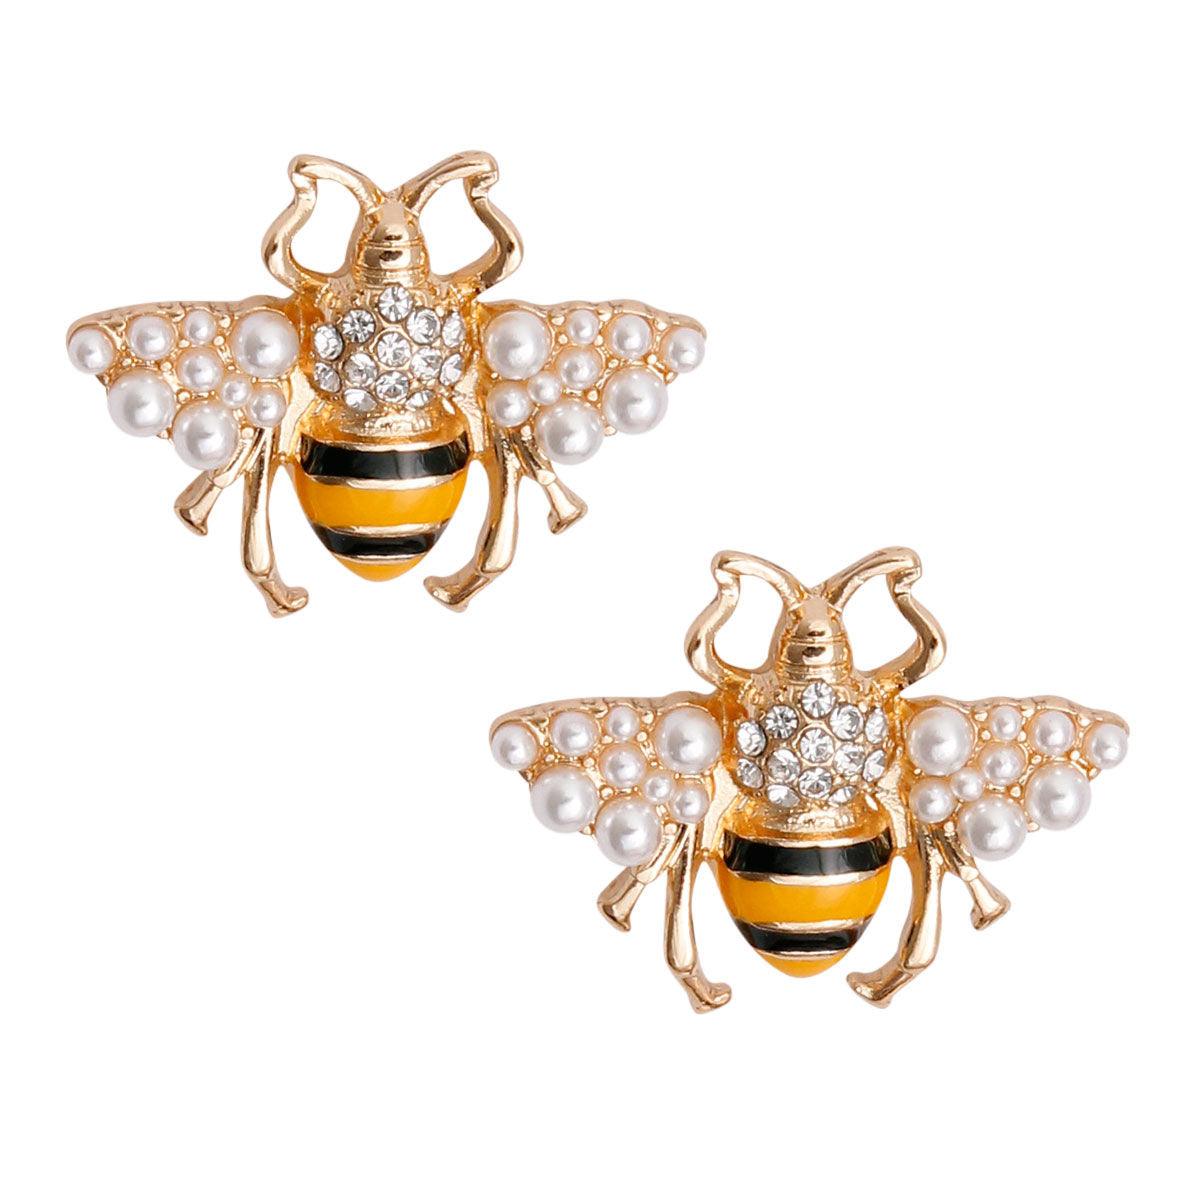 Yellow and Black Stripe Bee Stud Earrings: A Buzzworthy Fashion Accessory